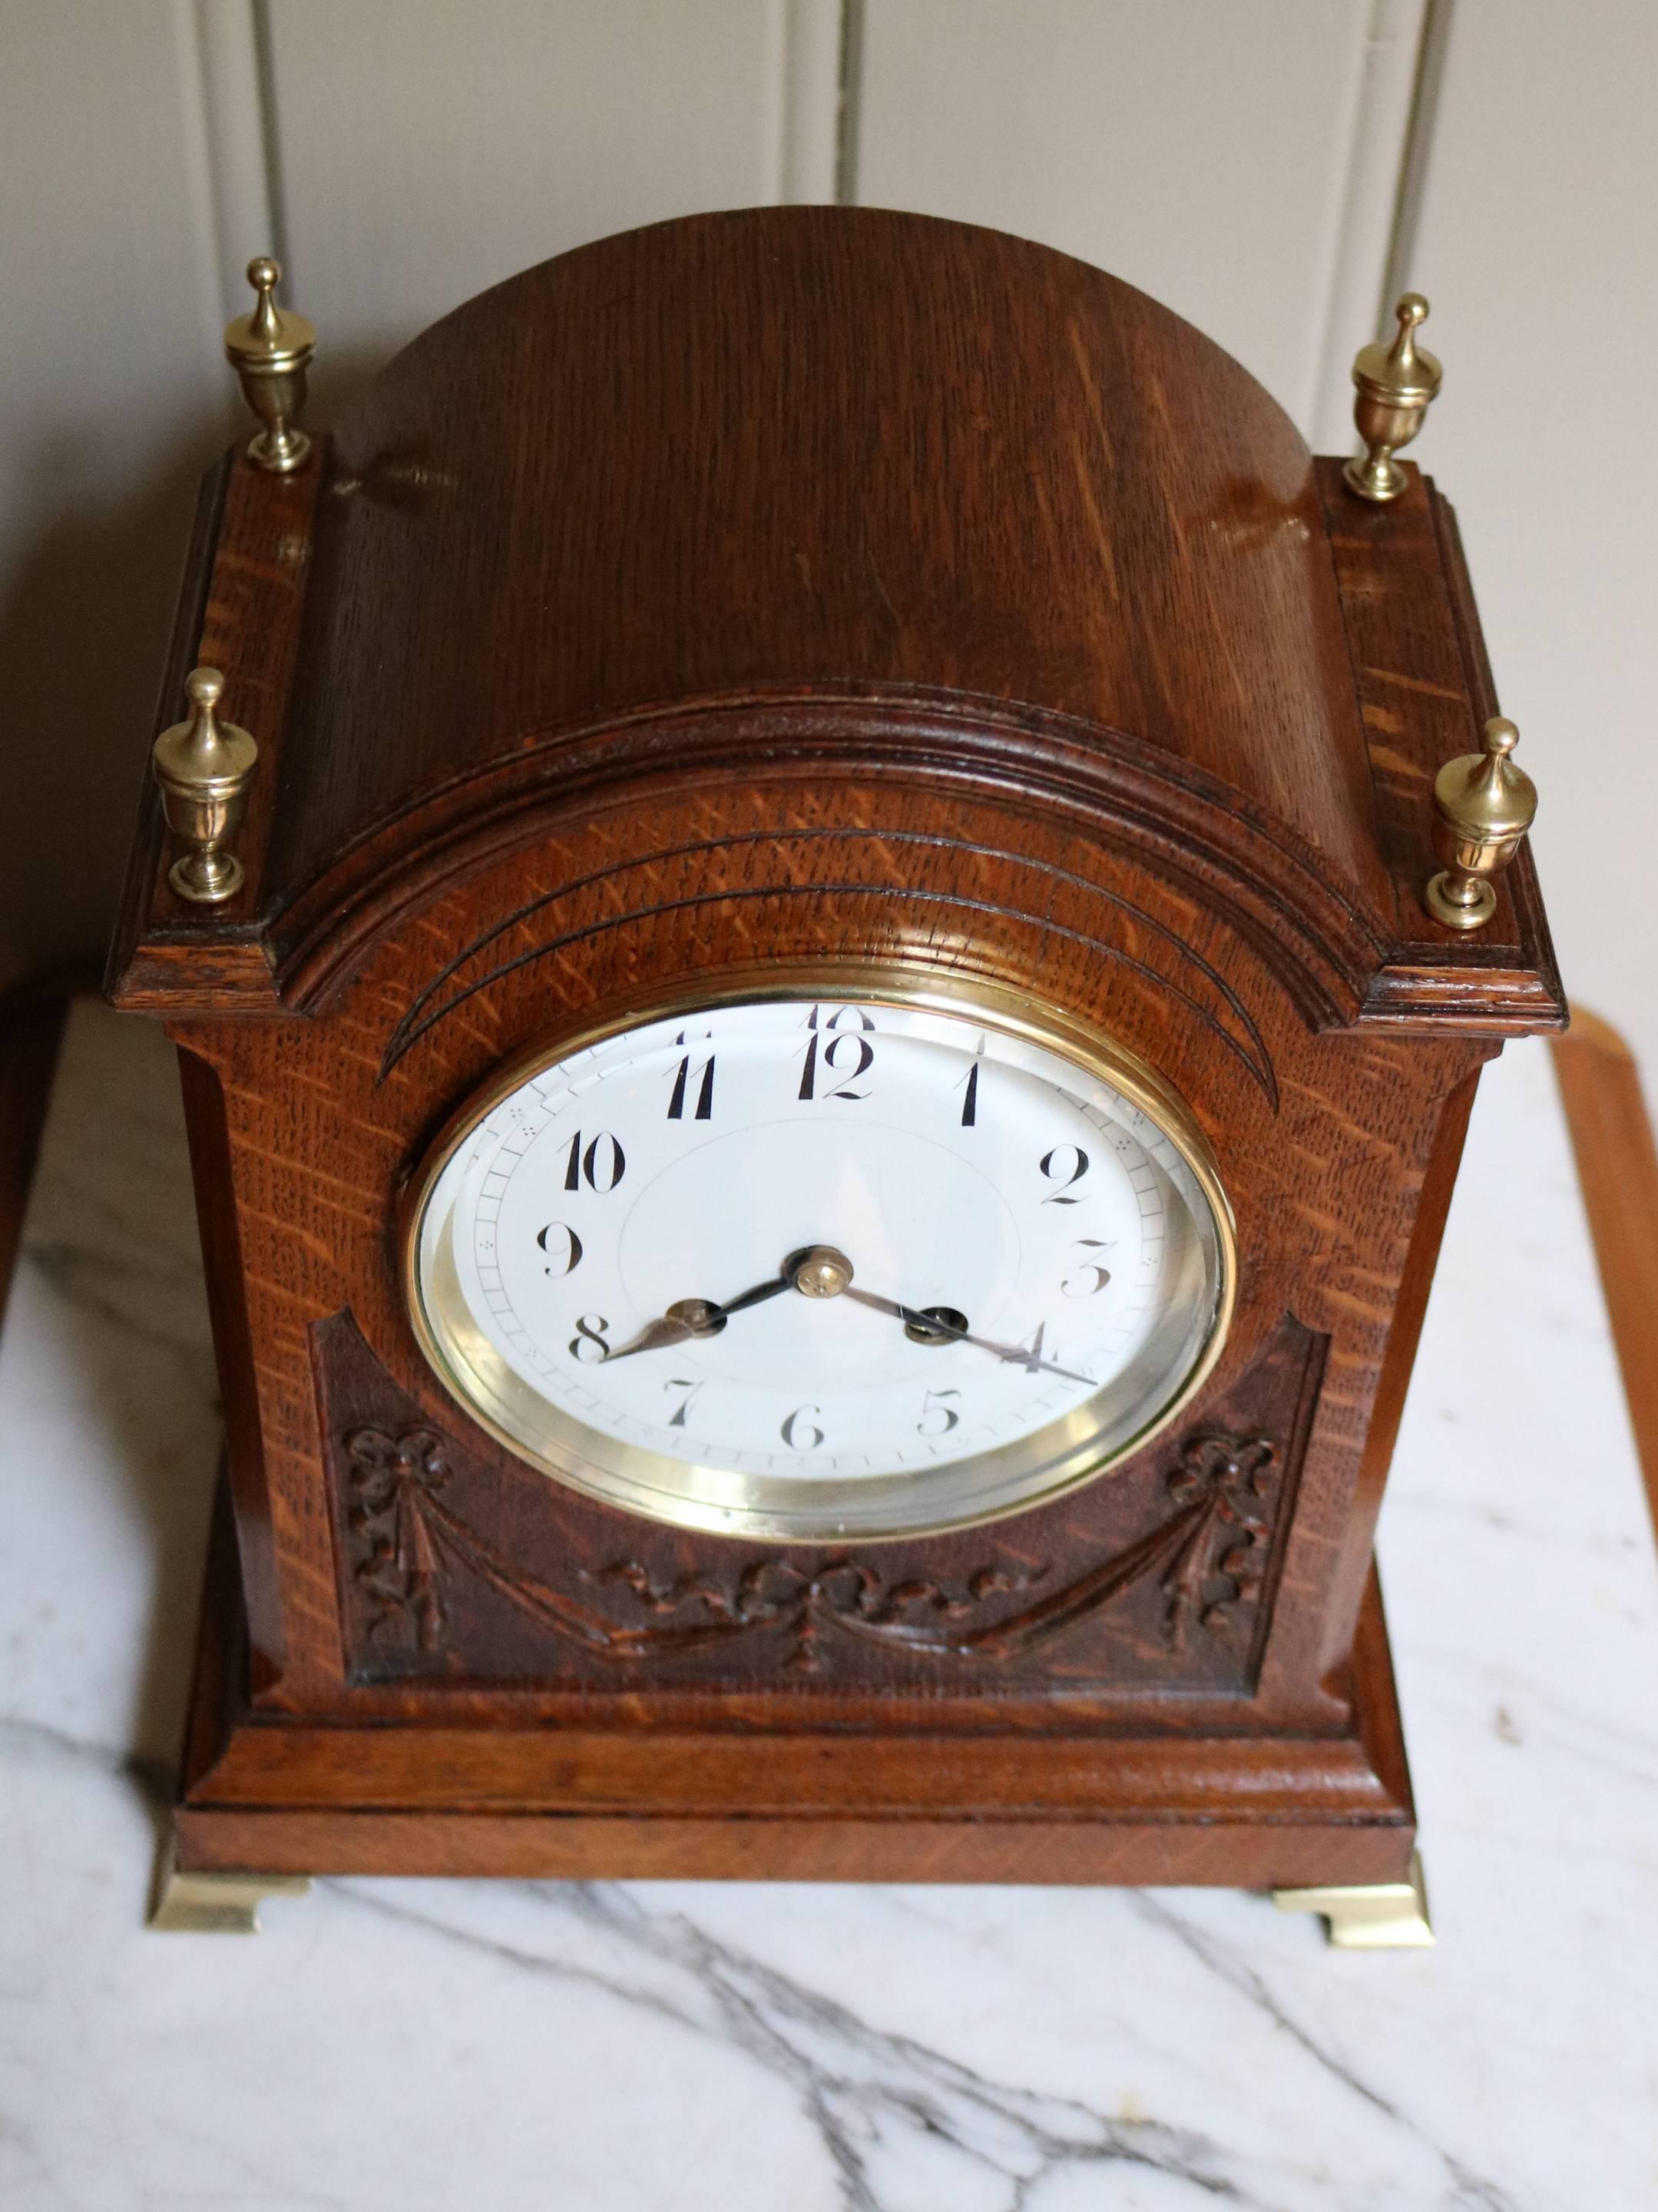 An attractive solid oak mantel clock dating to the early 20th century. It has an arch top with four brass corner finials, a well carved central panel of swags and ribbons,a stepped base standing on brass bracket feet. The enamel dial has a brass